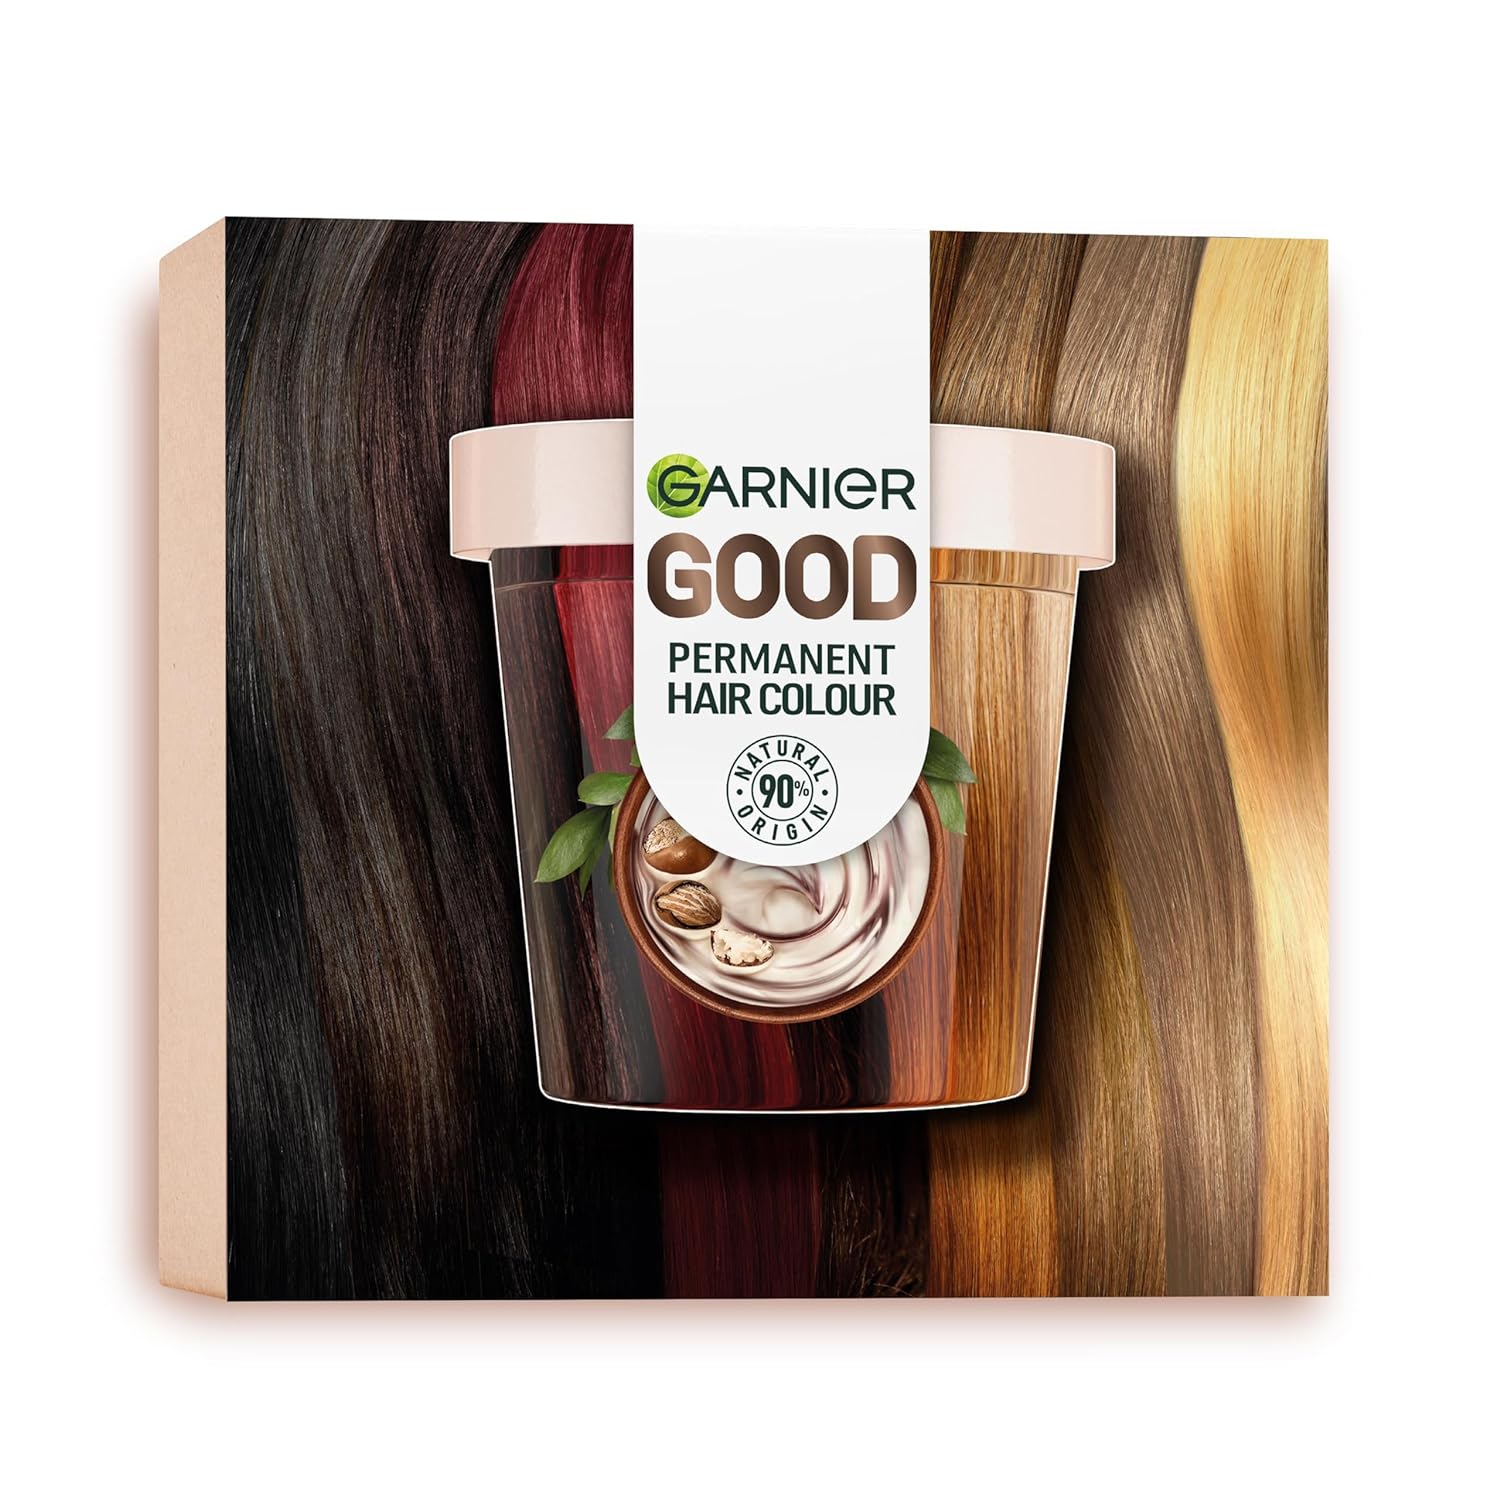 Garnier Permanent Hair Colour, Hard Dye Set for Intense and Long-Lasting Hair Colour, Colouration for up to 8 Weeks of Radiant Colour, No Ammonia, 7.0 Dark Almond Blonde, Good Refill Kit